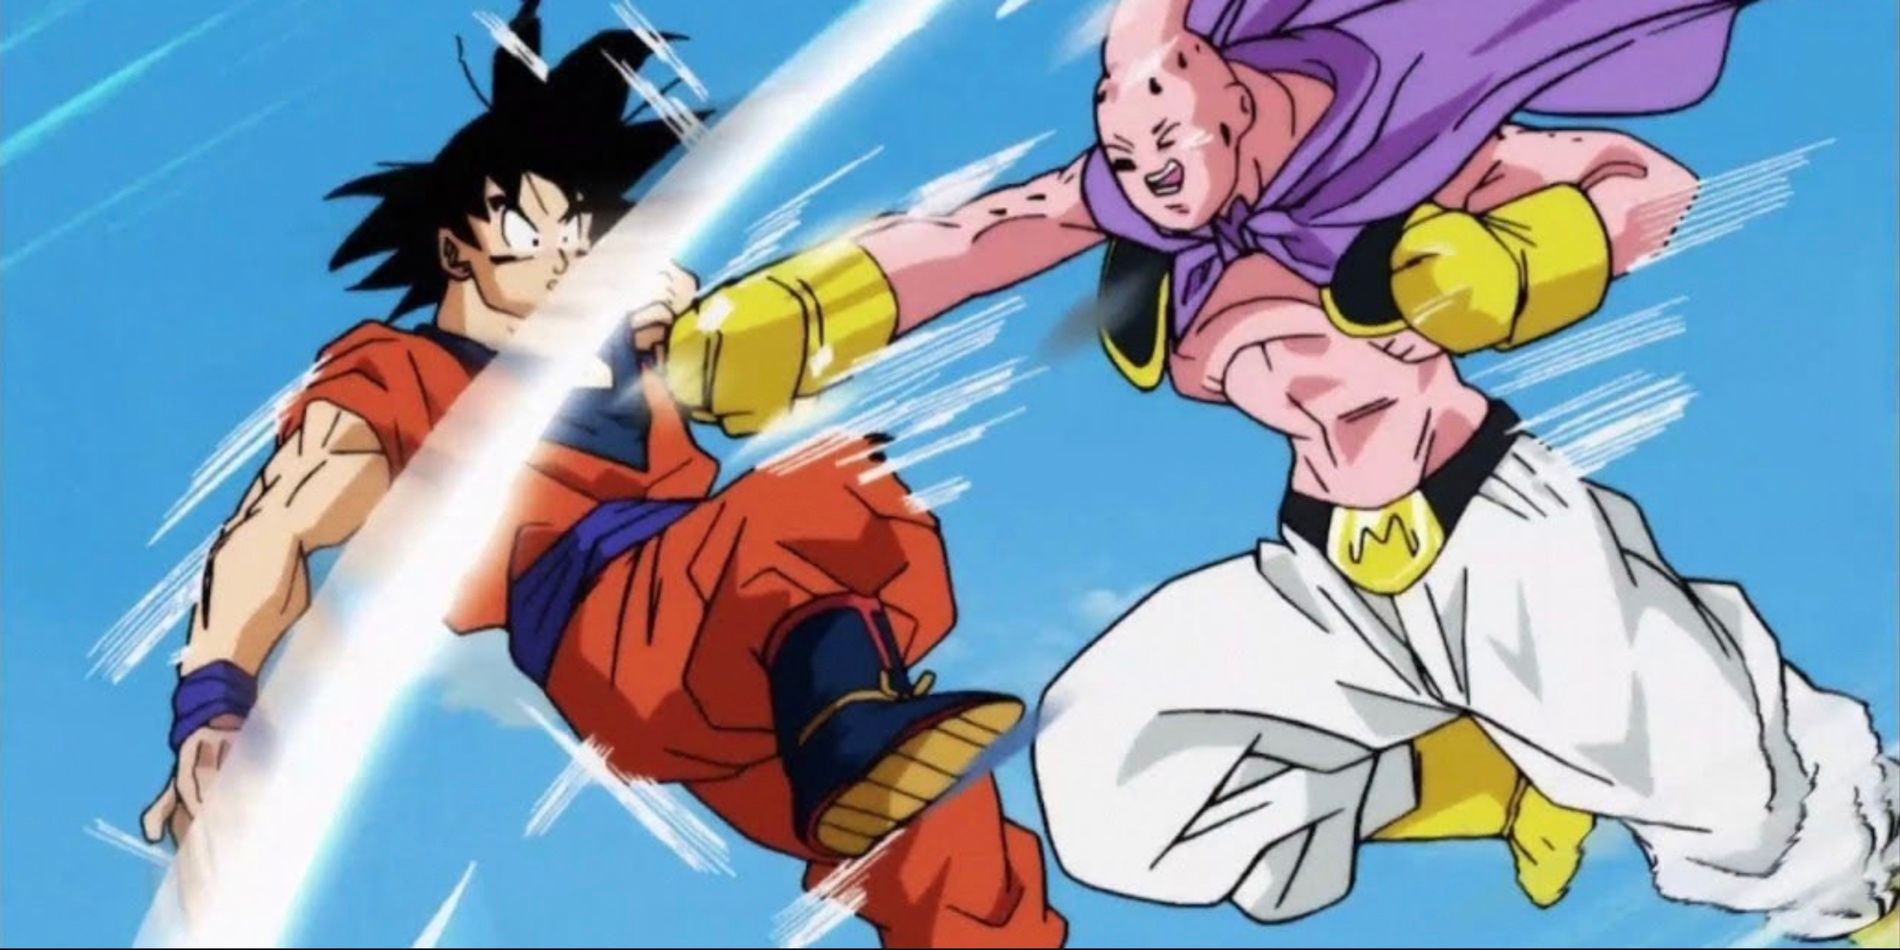 Fit Buu and Goku fight in Dragon Ball Super.